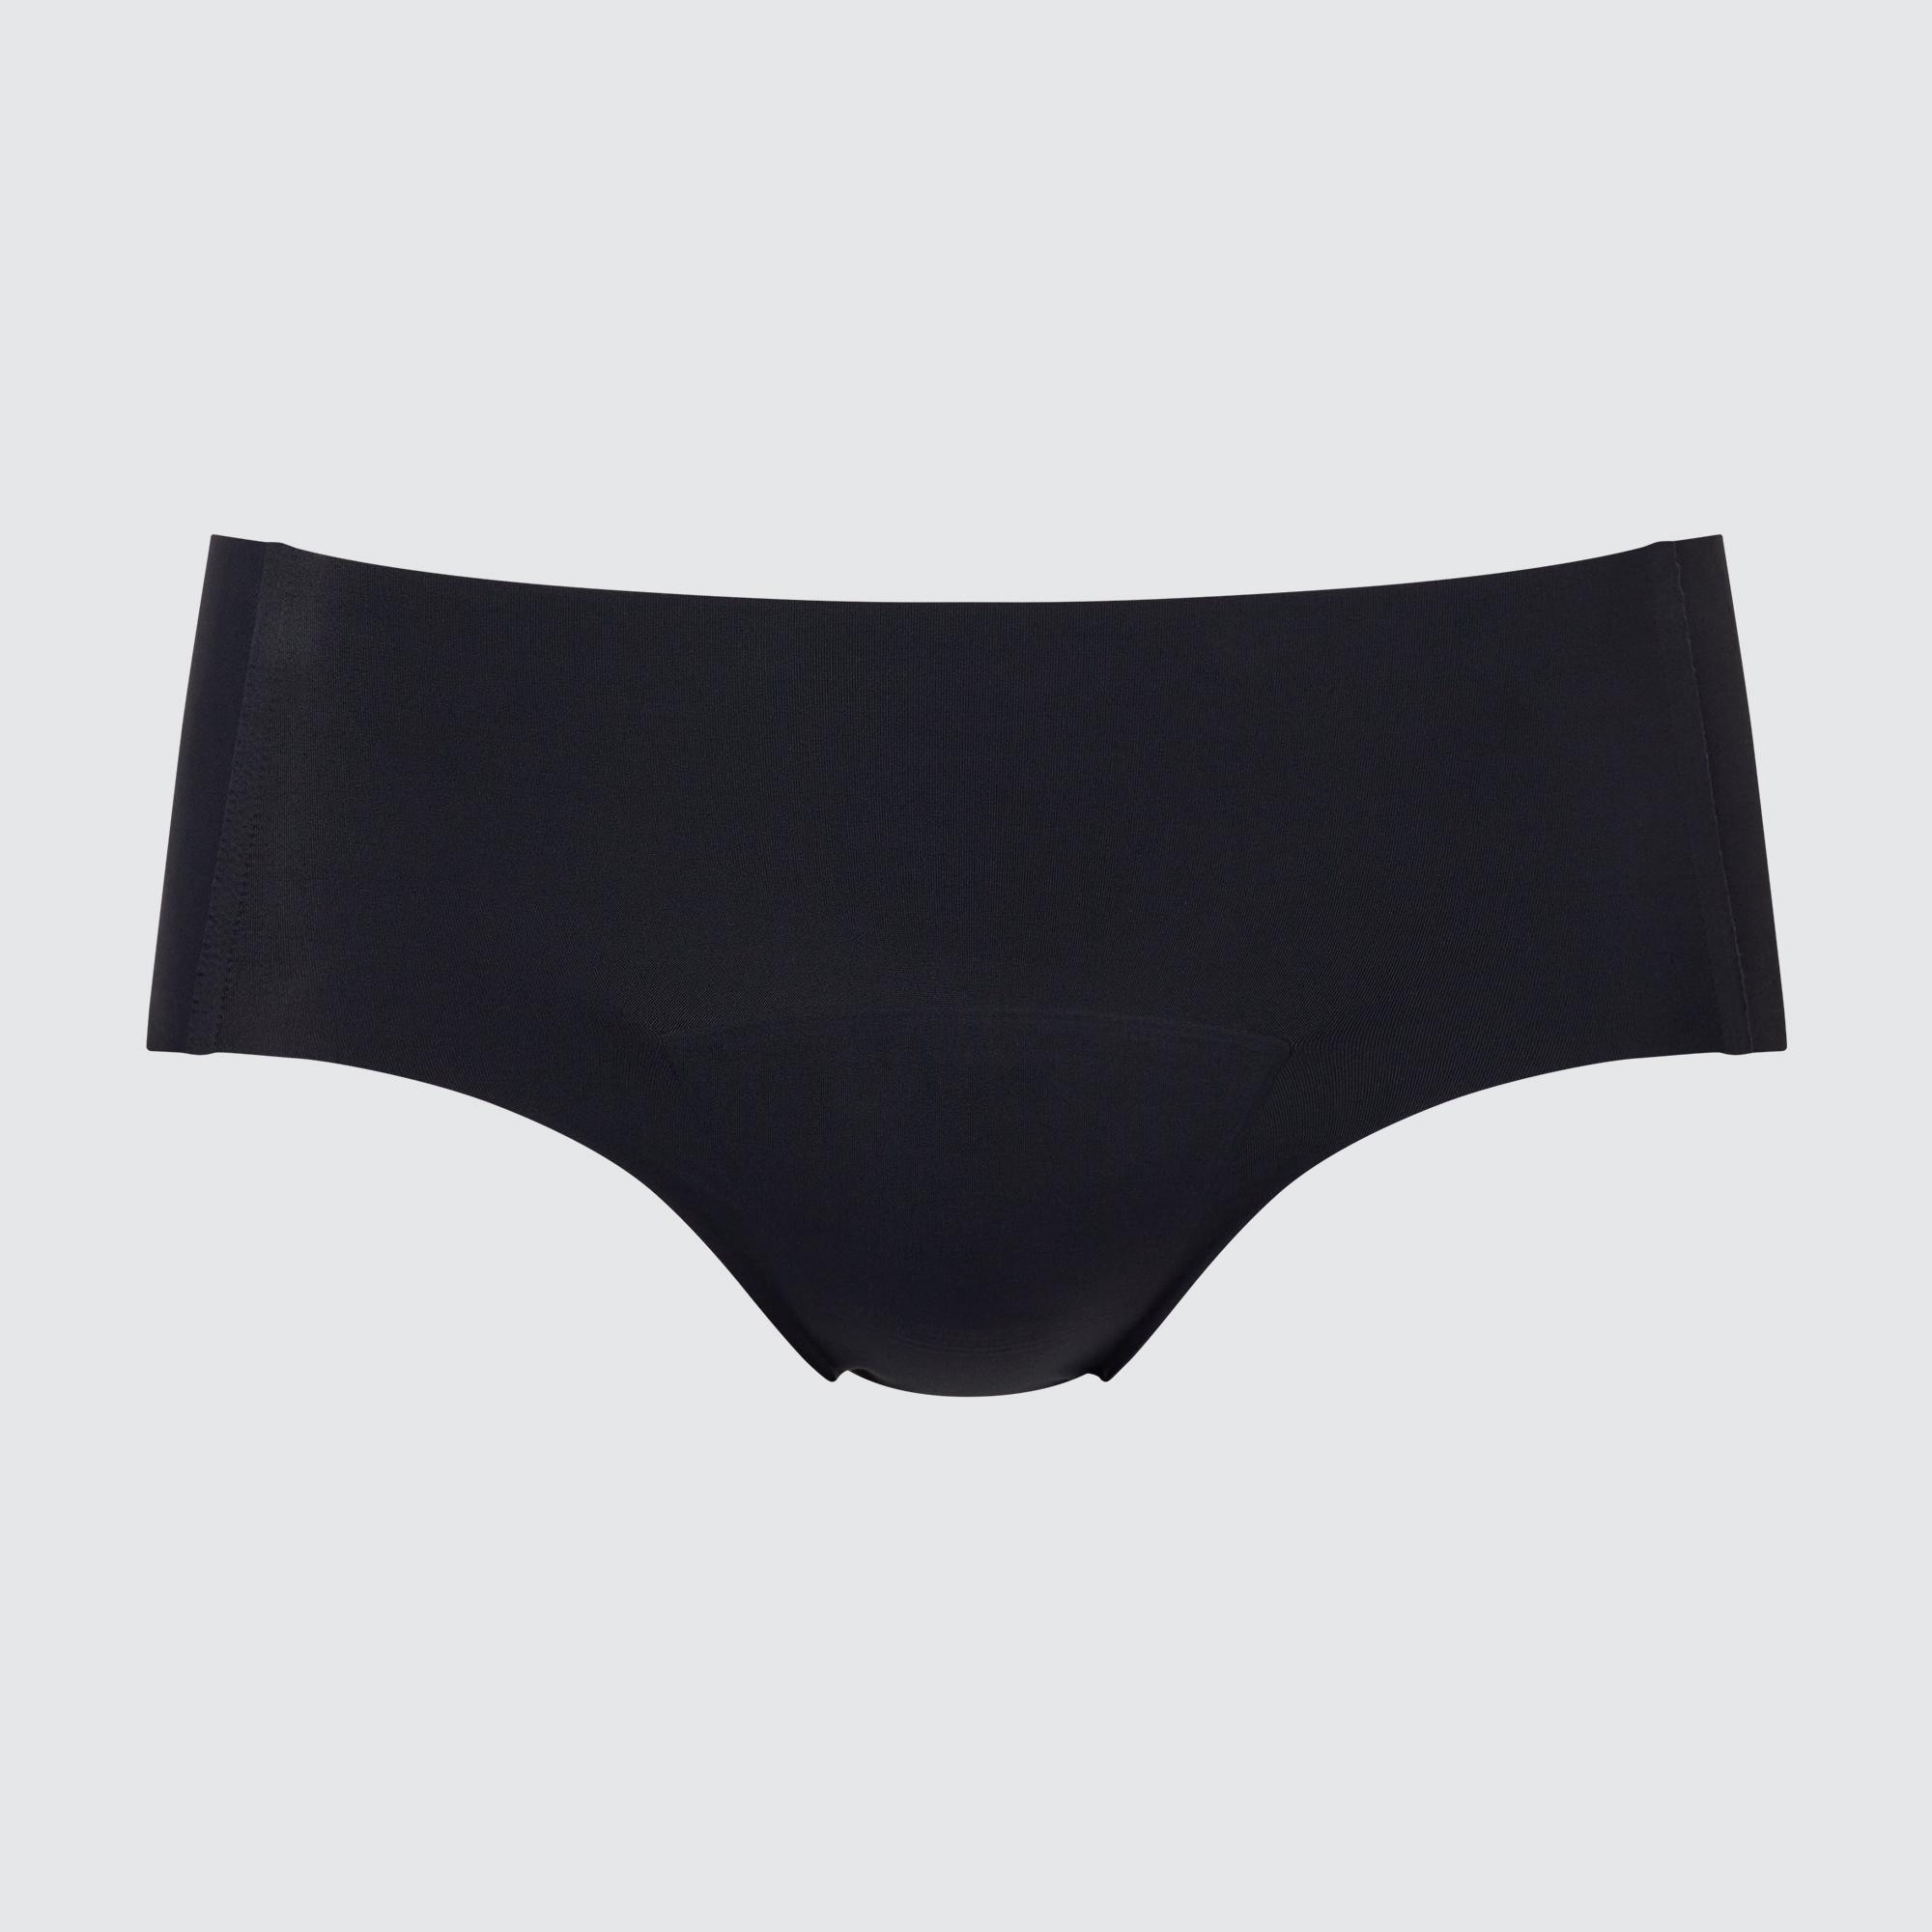 UNIQLO AIRism Absorbent Sanitary Shorts